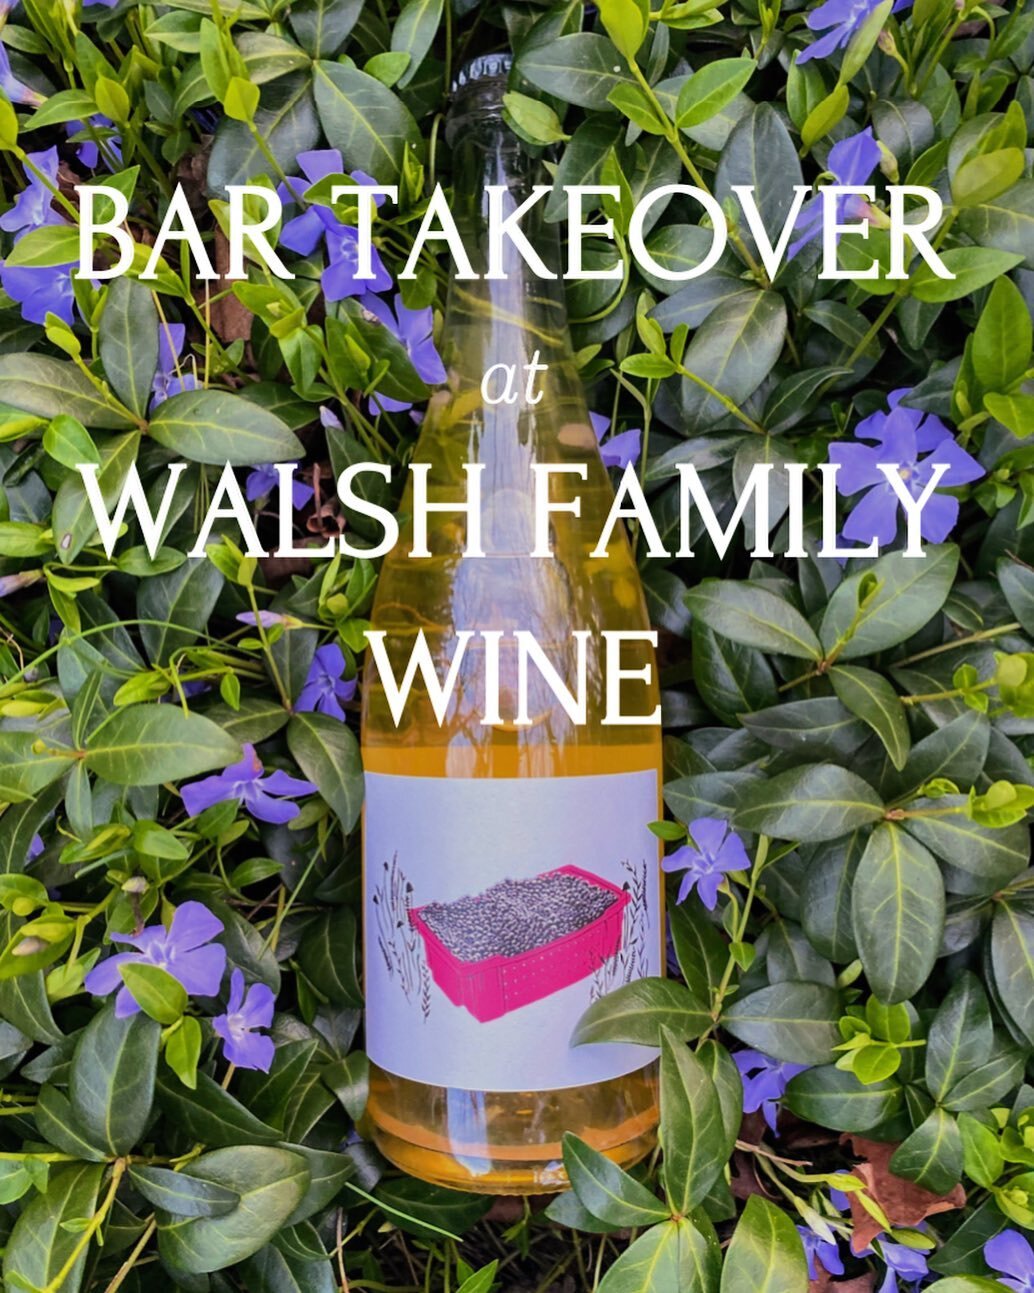 ⚡️Mark your calendars!⚡️
We&rsquo;ll be joining friends from @crookedrunbrew for a bar takeover at beautiful @walshfamilywine on June 25 from 4 PM to 8 PM. We&rsquo;ll pop the p&eacute;t-nats and maybe will be sharing some samples of a to-be-released